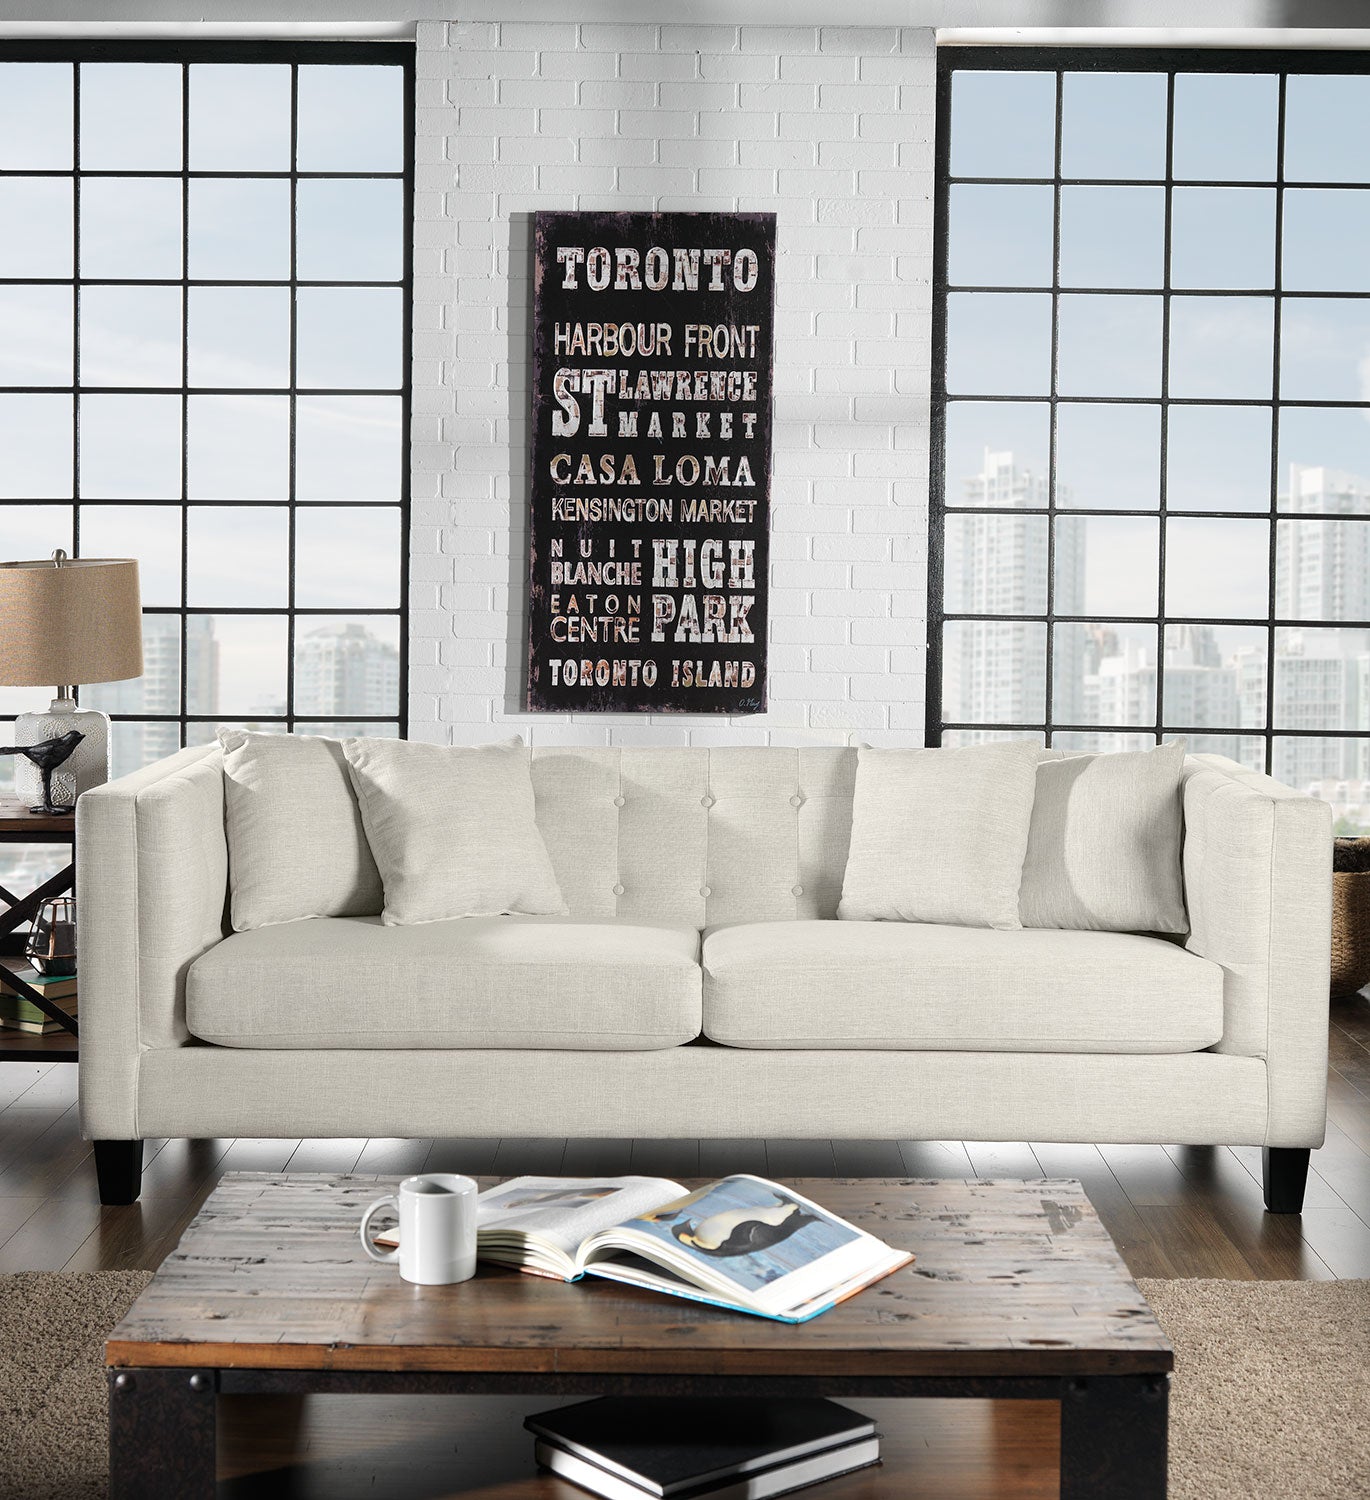 Astin Sofa, Loveseat and Chair and a Half Set - Wheat